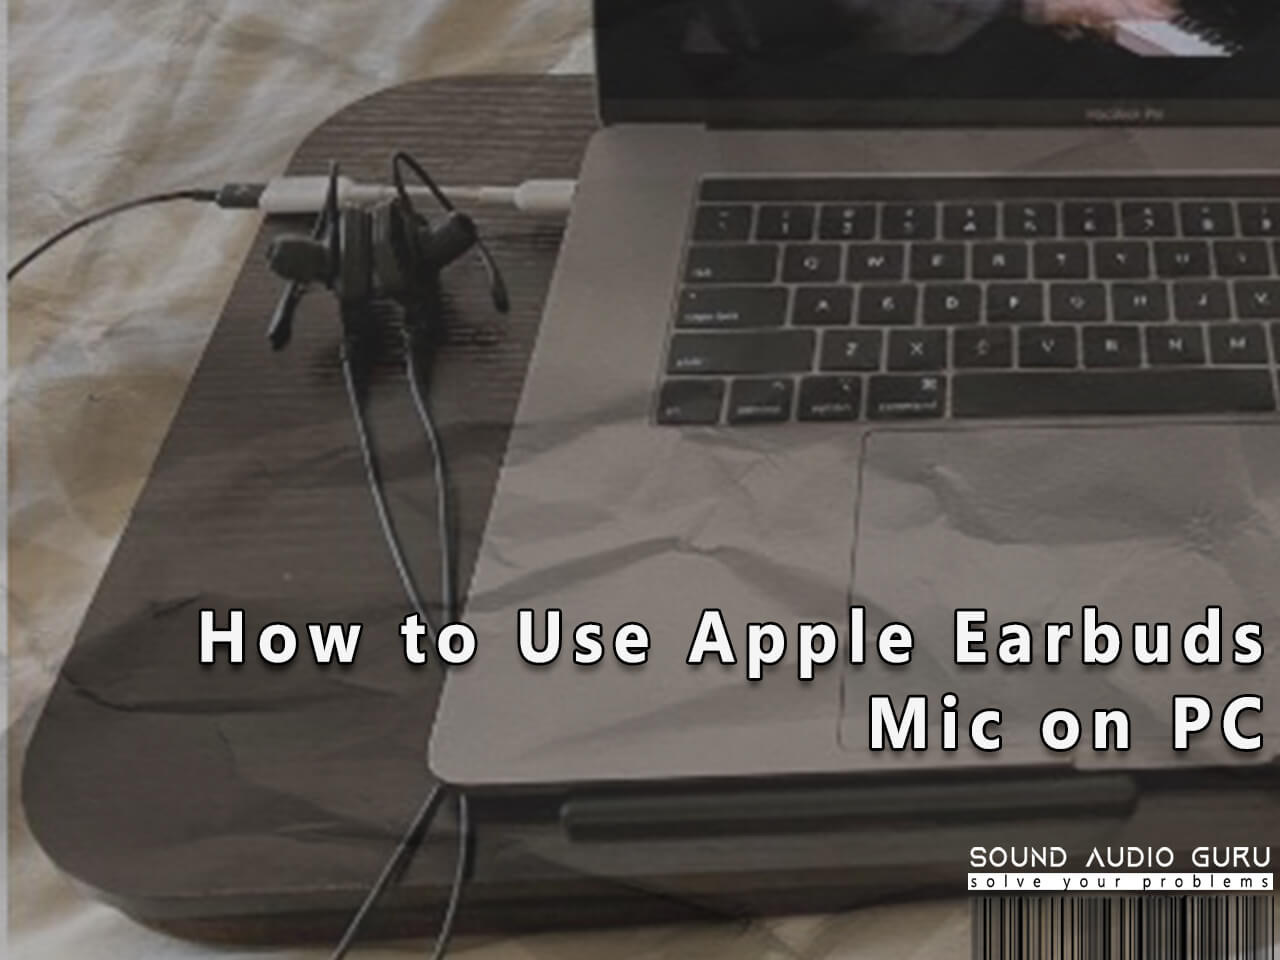 How to Use Apple Earbuds Mic on PC